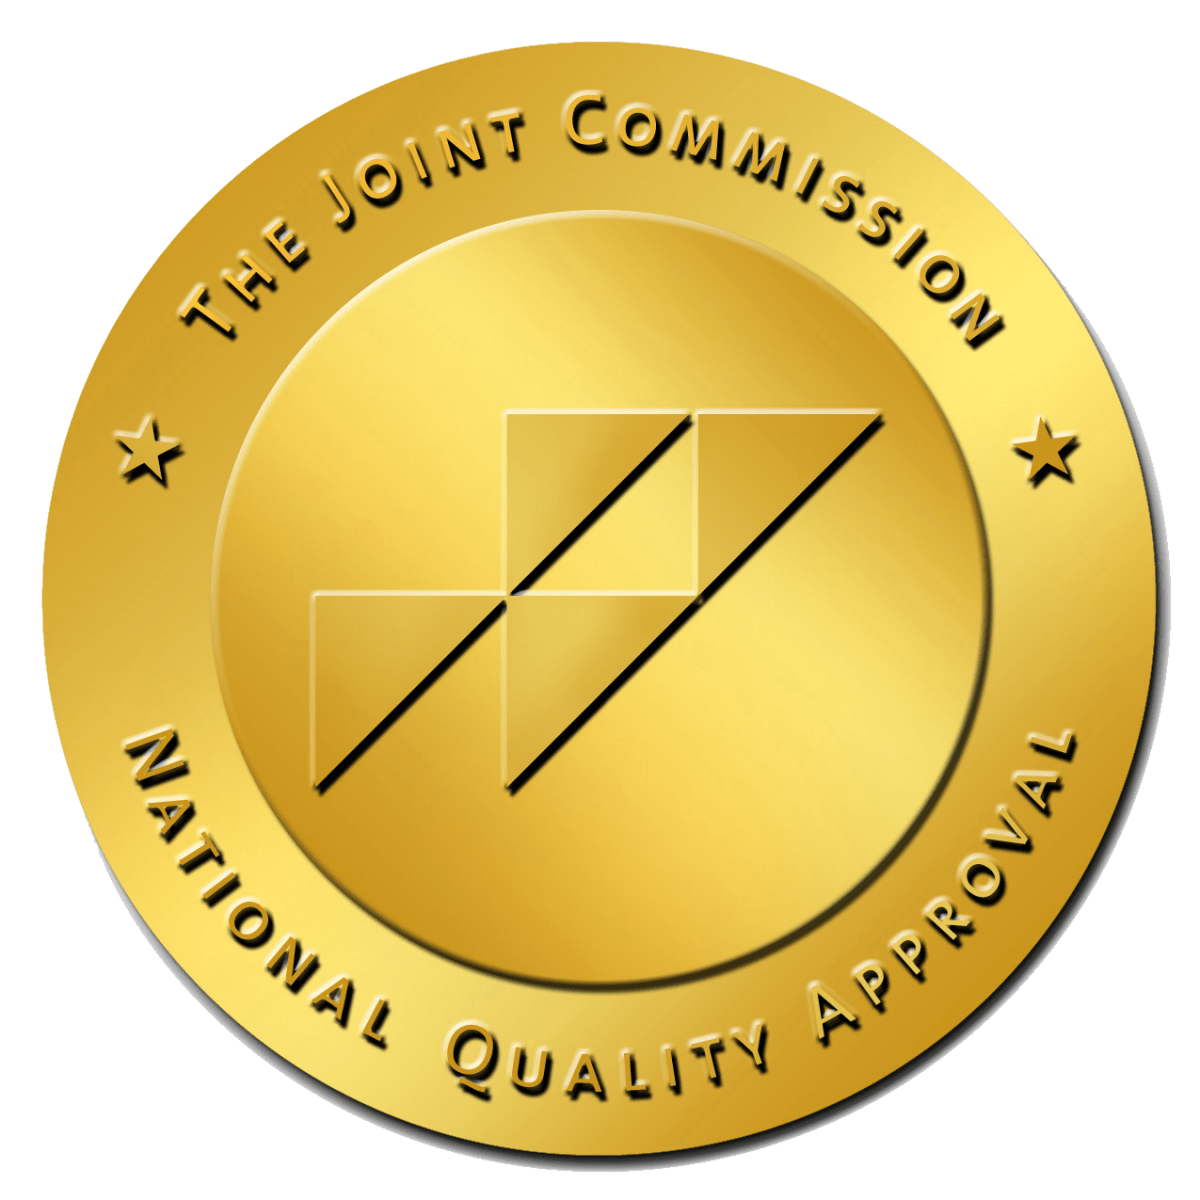 Joint commission seal/badge